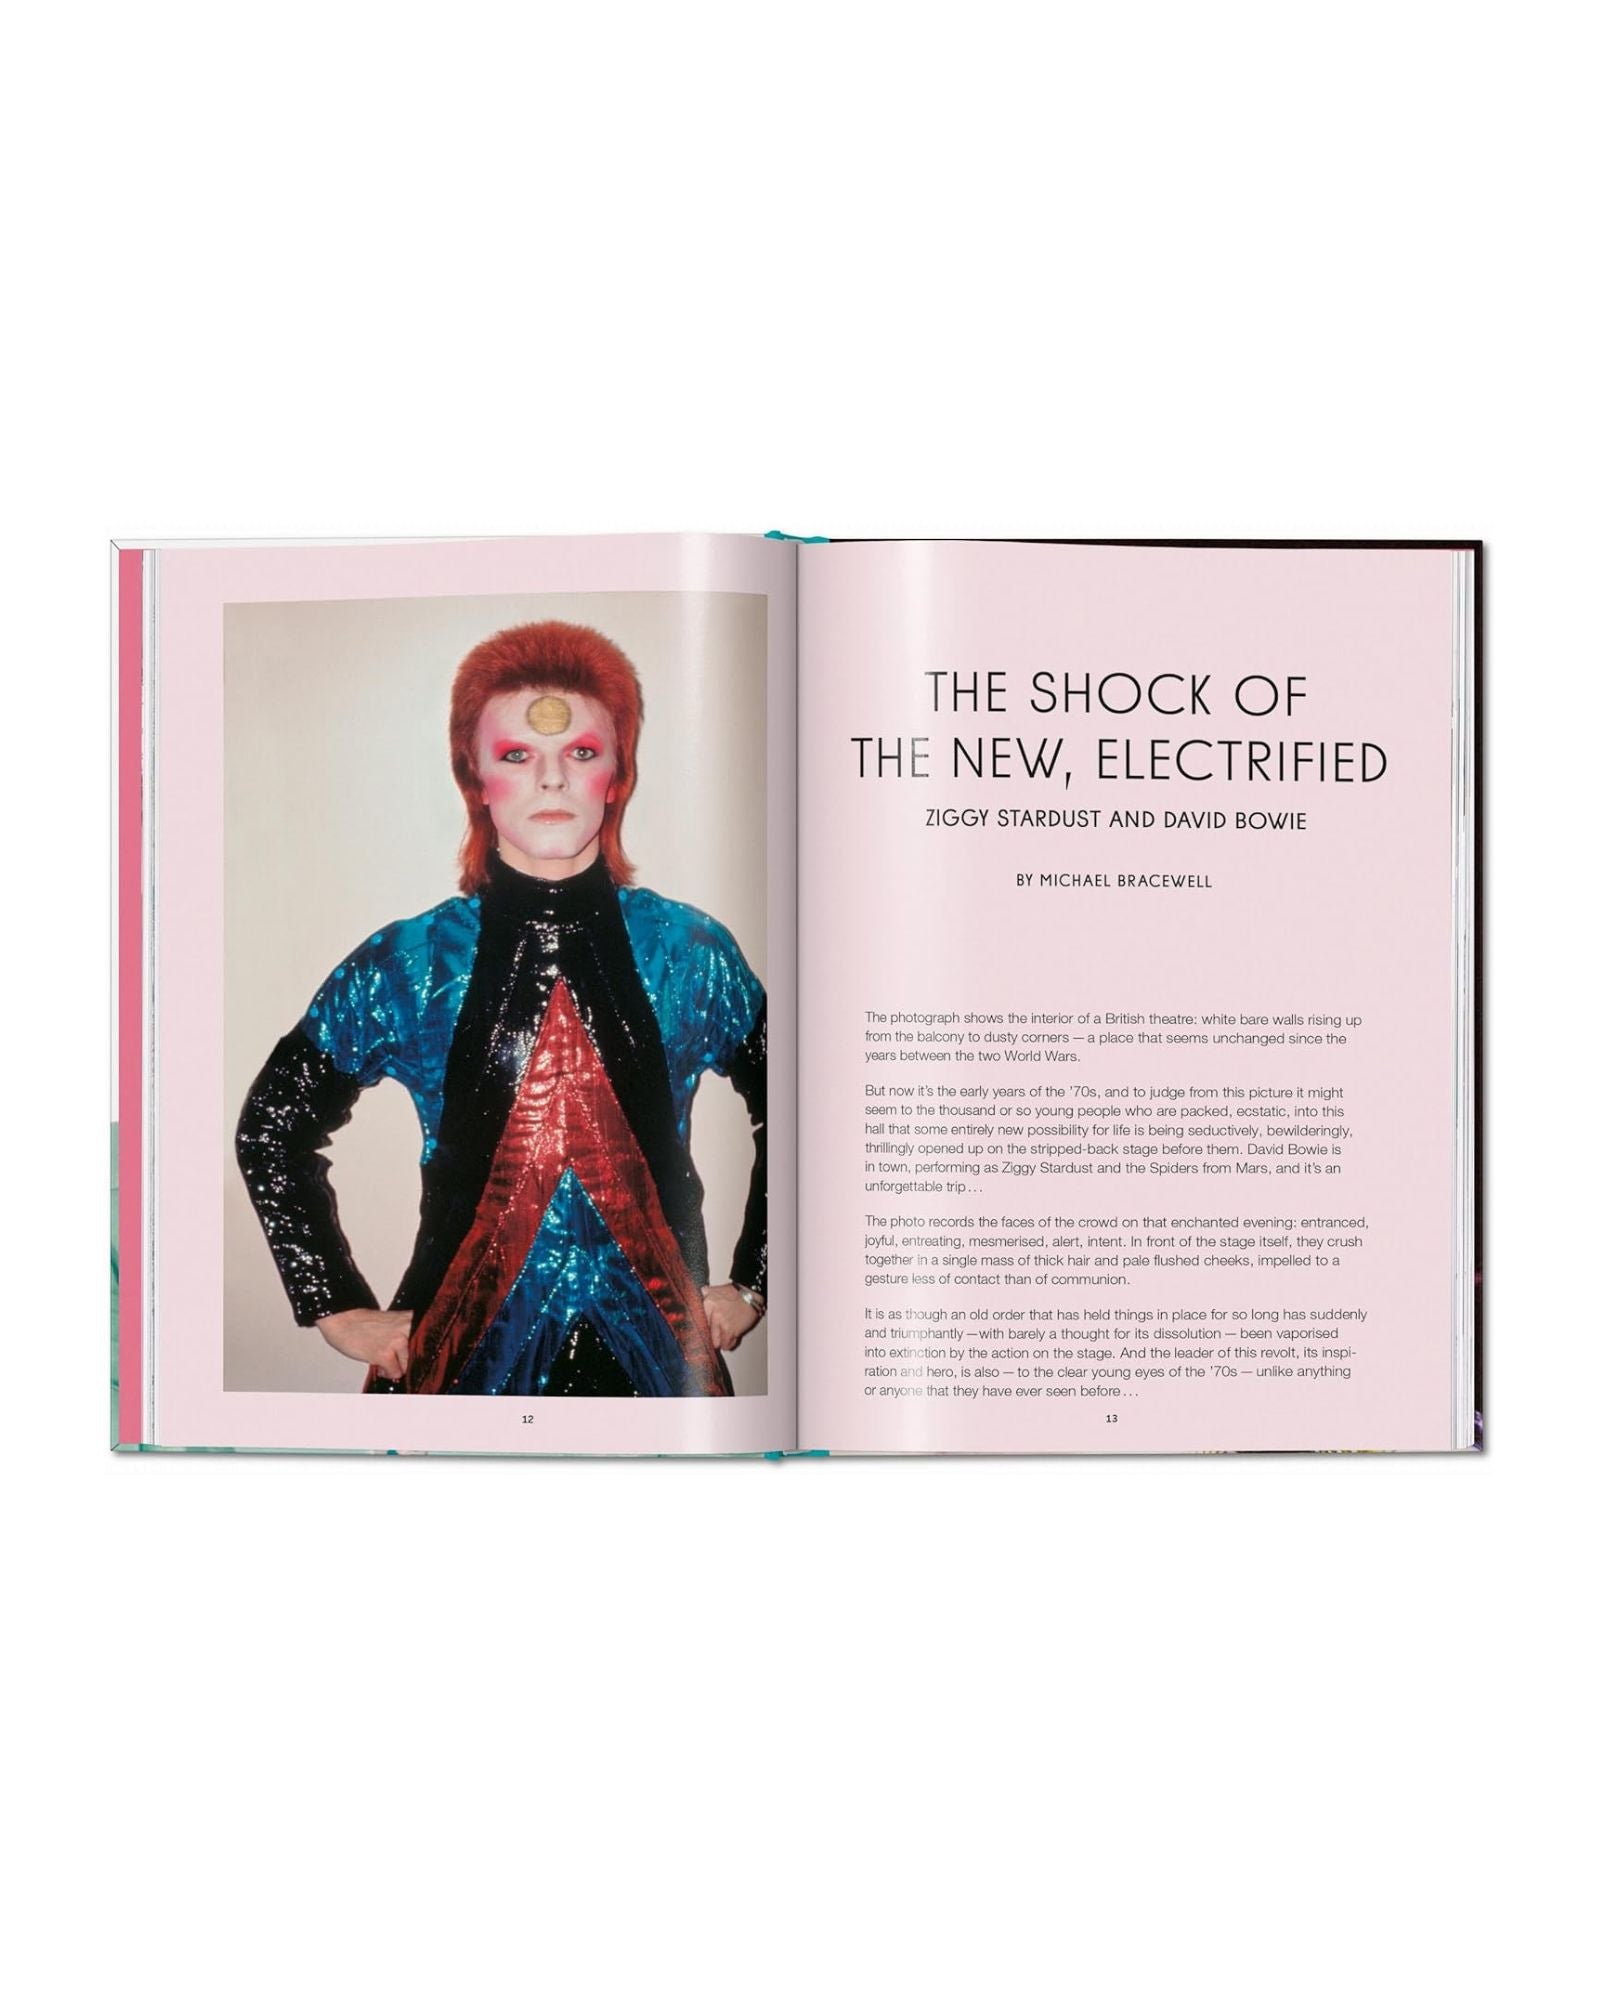 THE RISE OF DAVID BOWIE - BOOK